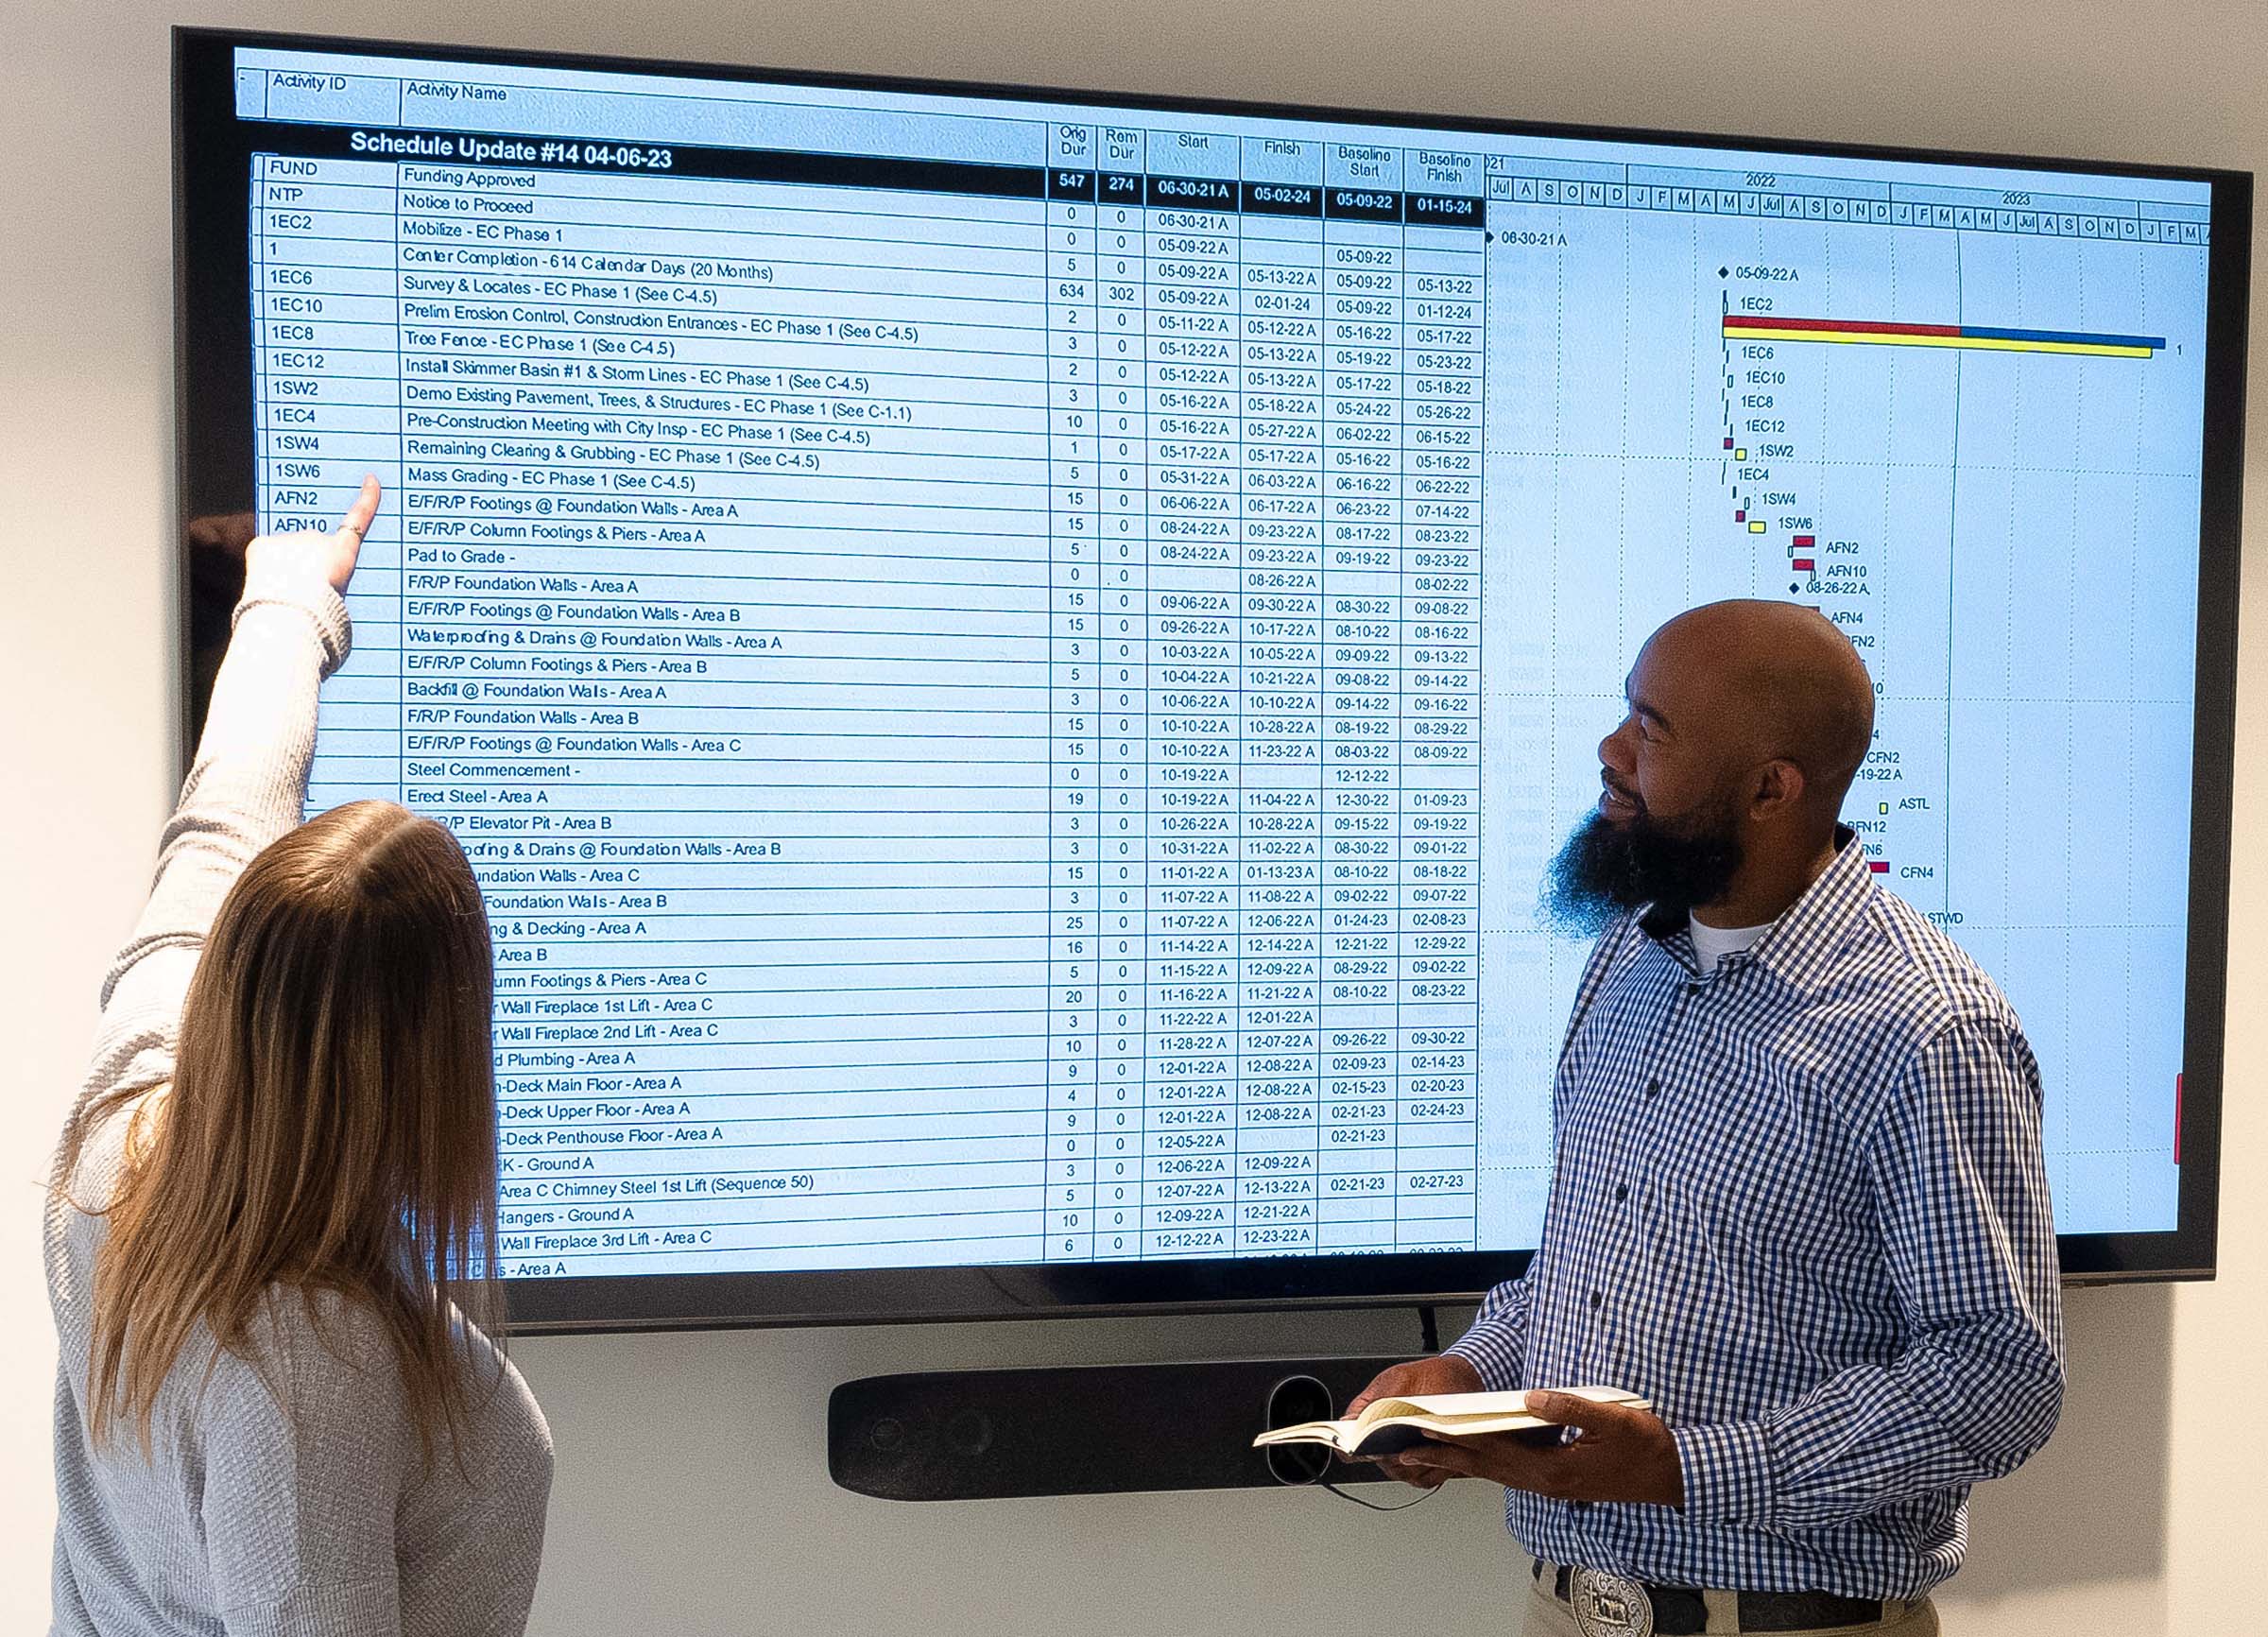 ý's Pre-Construction Team stands in front of a digital display board, preparing for a large building project in North Carolina.